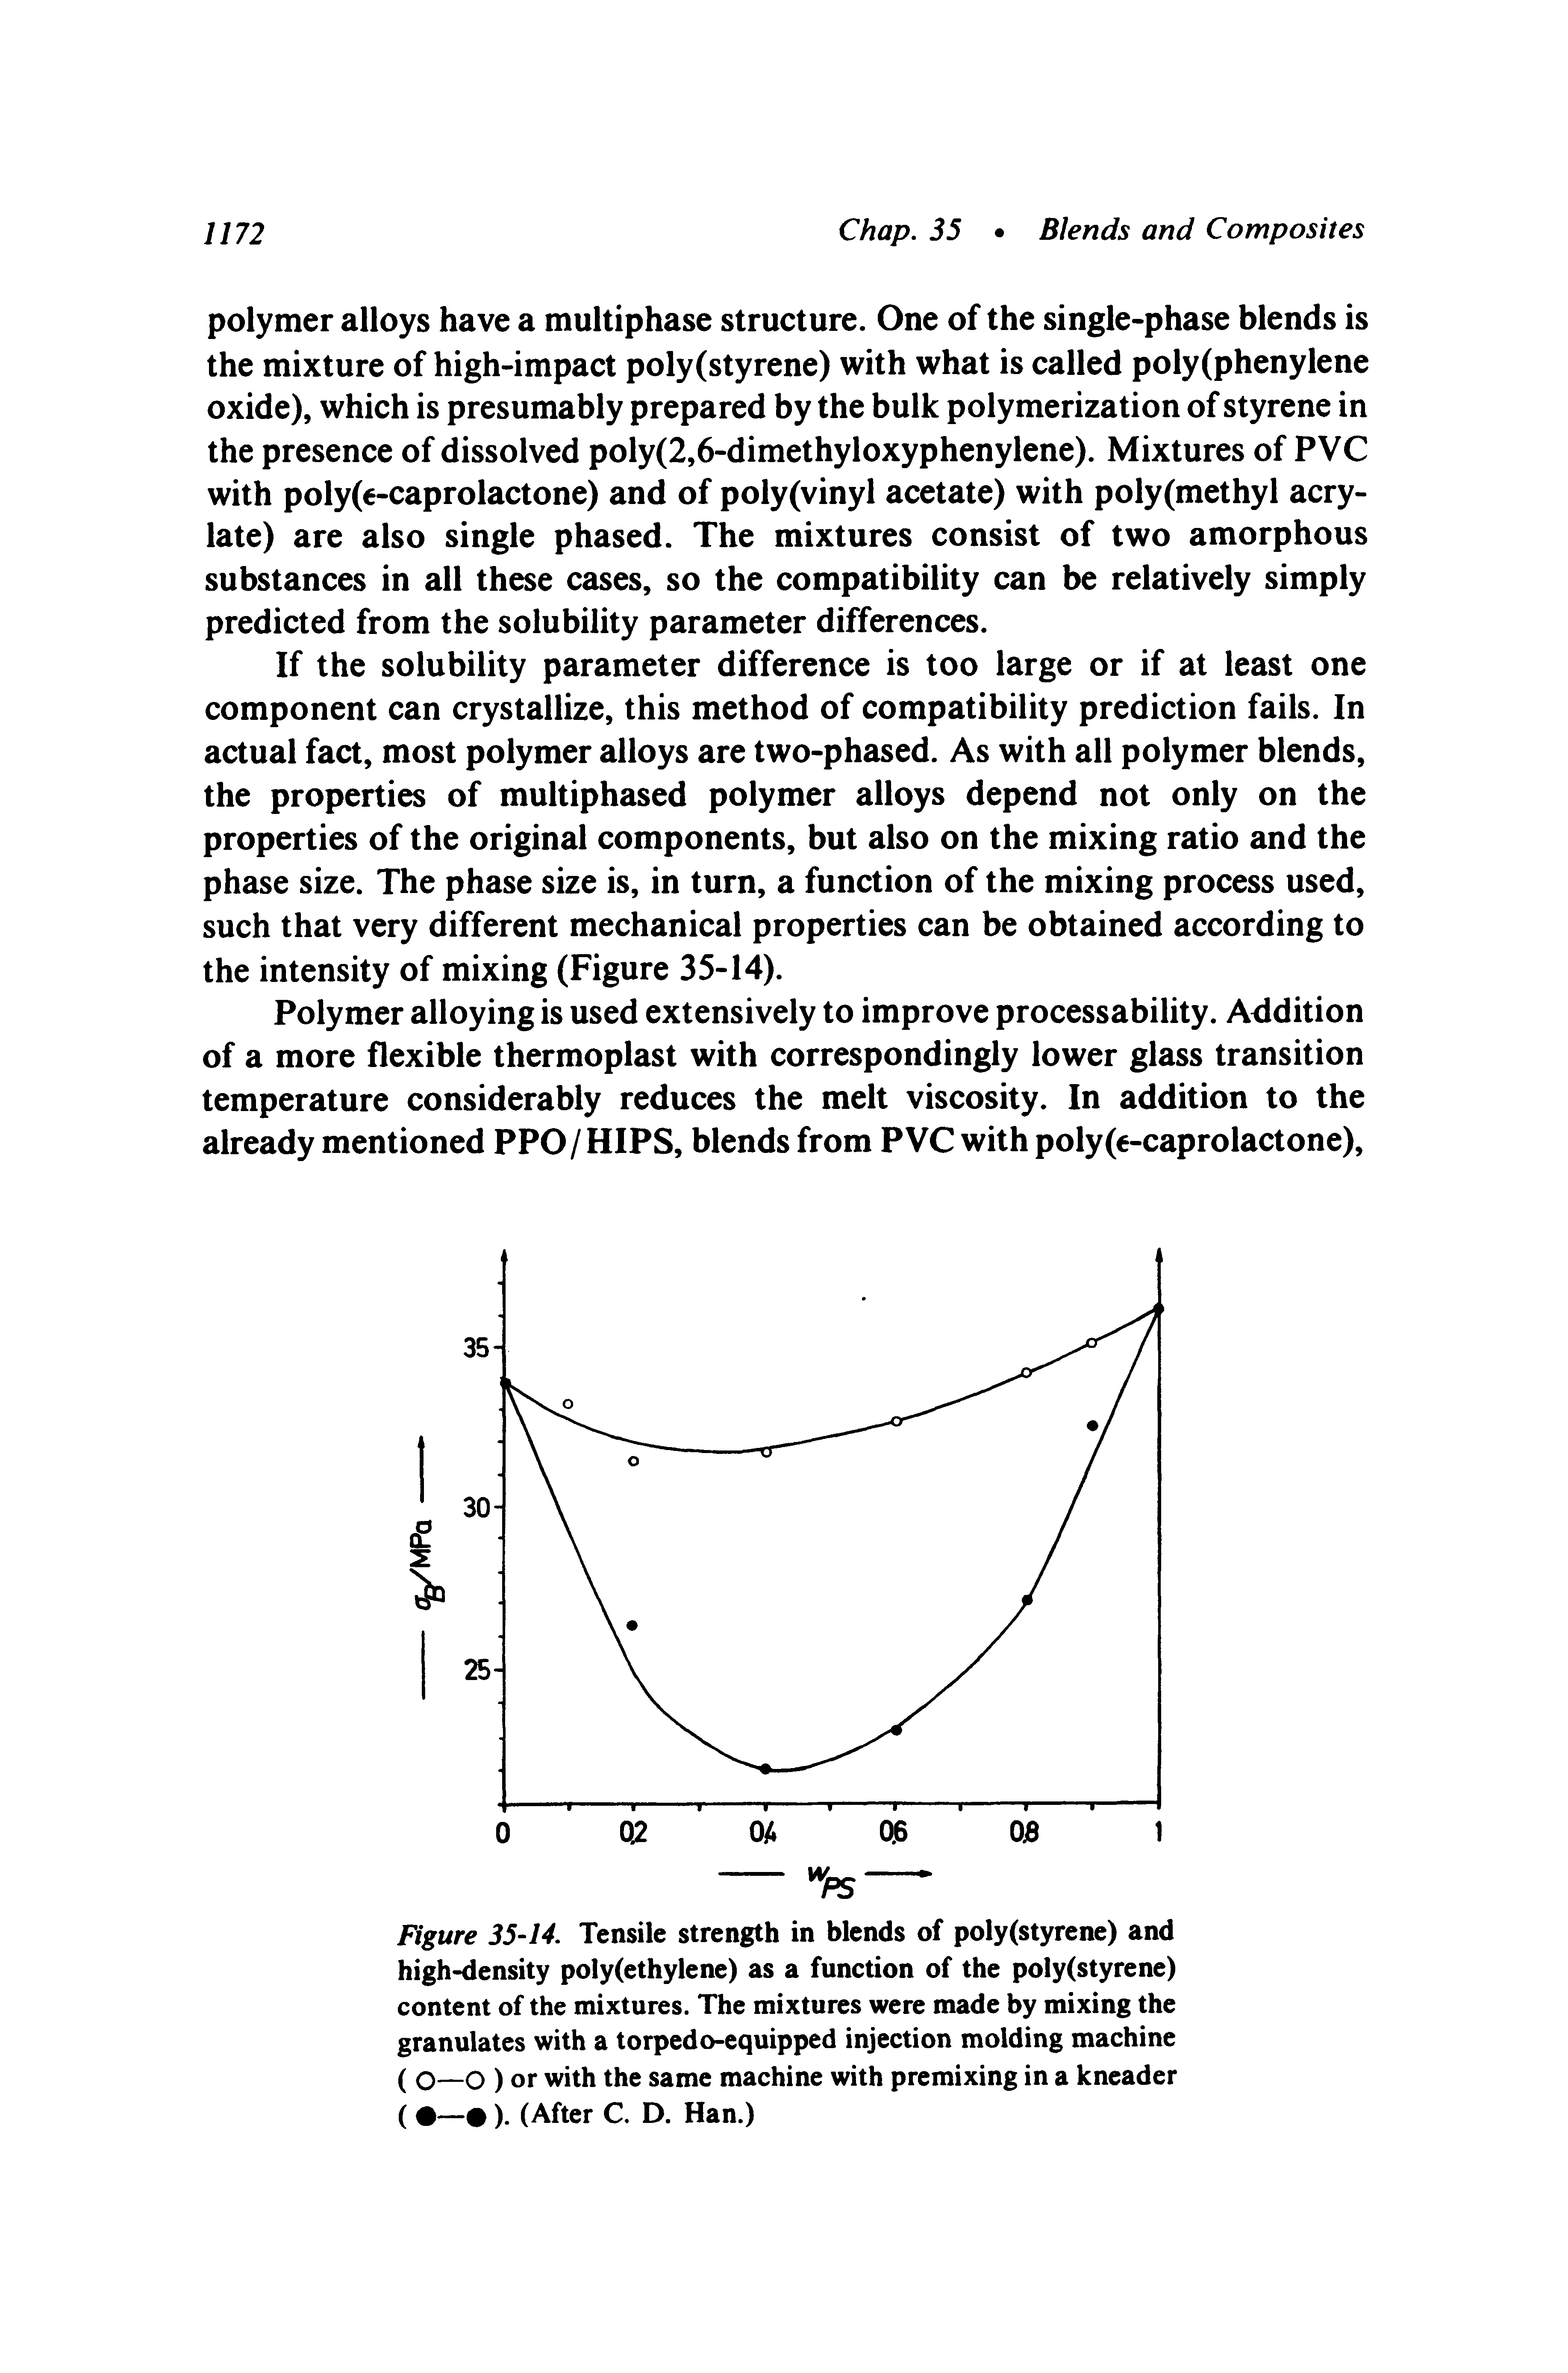 Figure 35-14. Tensile strength in blends of poly (styrene) and high-density poly(ethylene) as a function of the poly(styrene) content of the mixtures. The mixtures were made by mixing the granulates with a torpedo-equipped injection molding machine ( 0—0 ) or with the same machine with premixing in a kneader ( — ). (After C. D. Han.)...